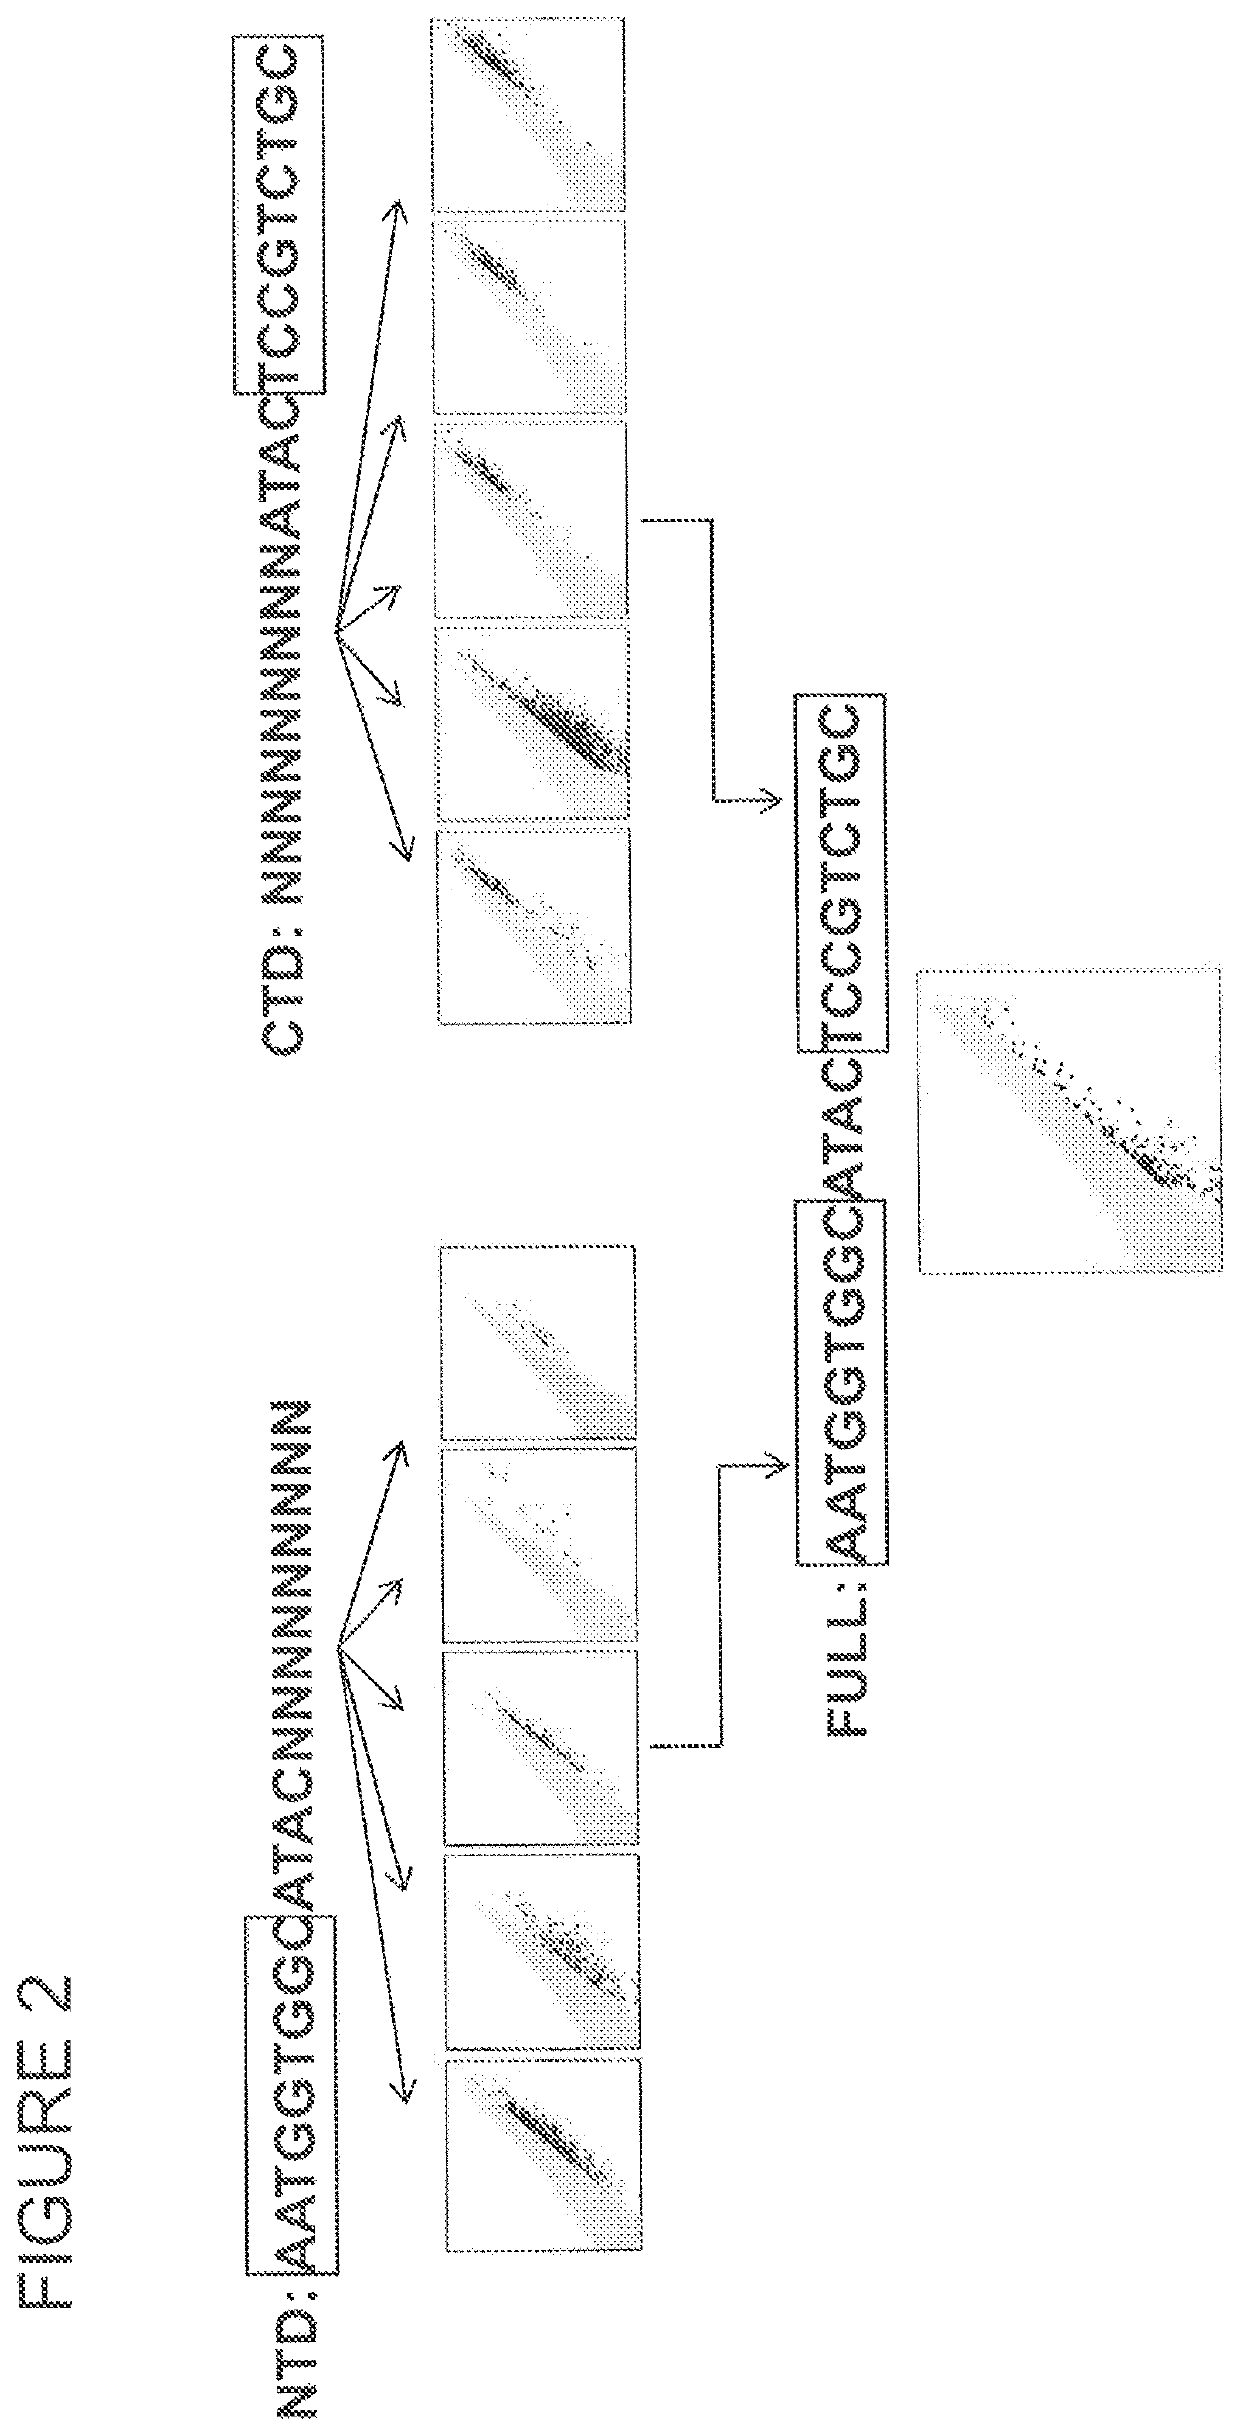 PD-1 homing endonuclease variants, compositions, and methods of use